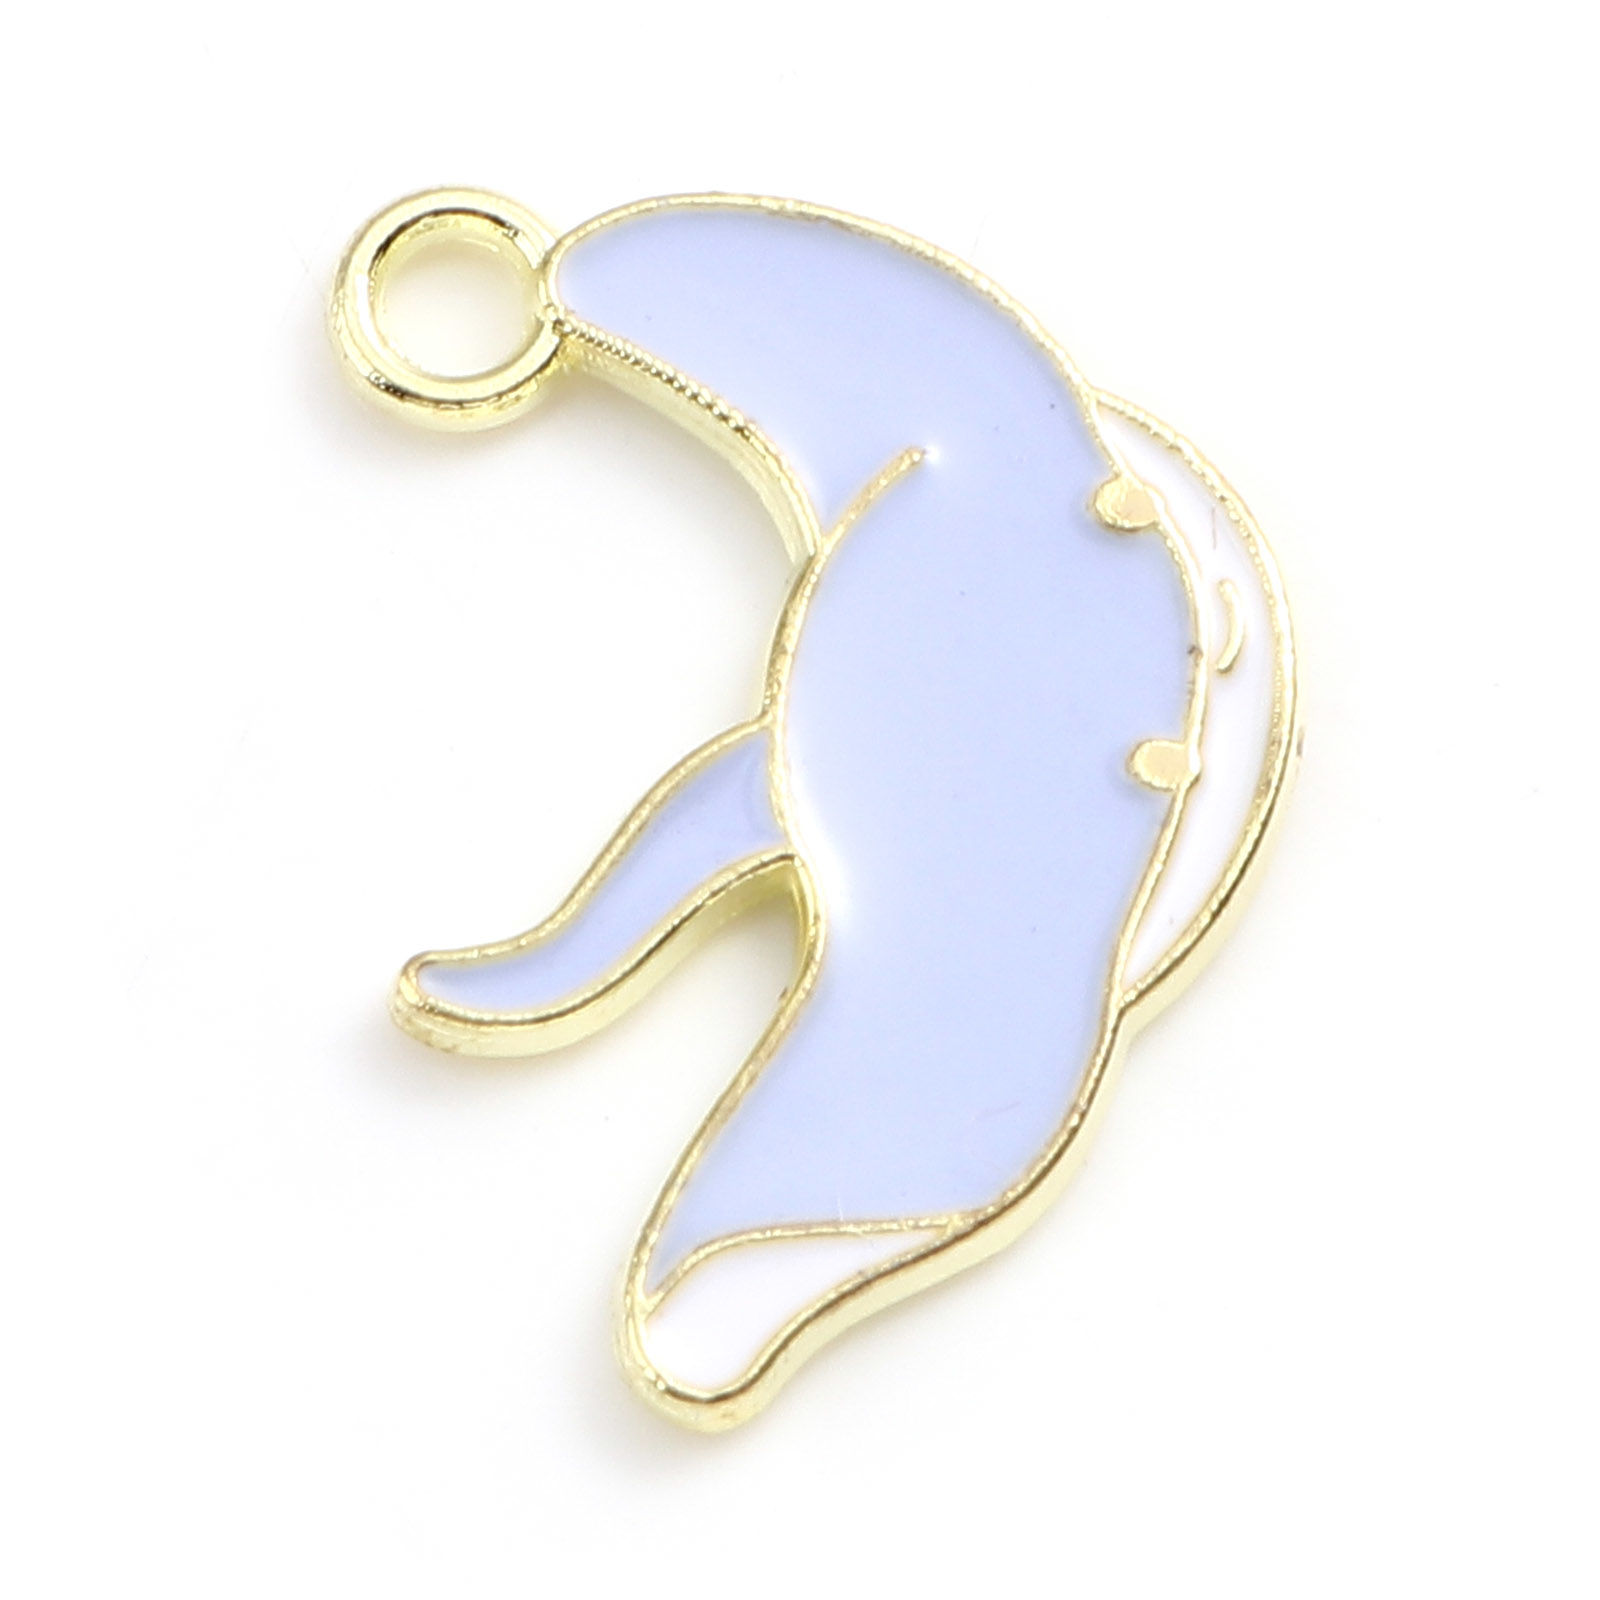 Picture of Zinc Based Alloy Ocean Jewelry Charms Ray Skate Fish Gold Plated Light Blue Violet Enamel 20mm x 15mm, 20 PCs